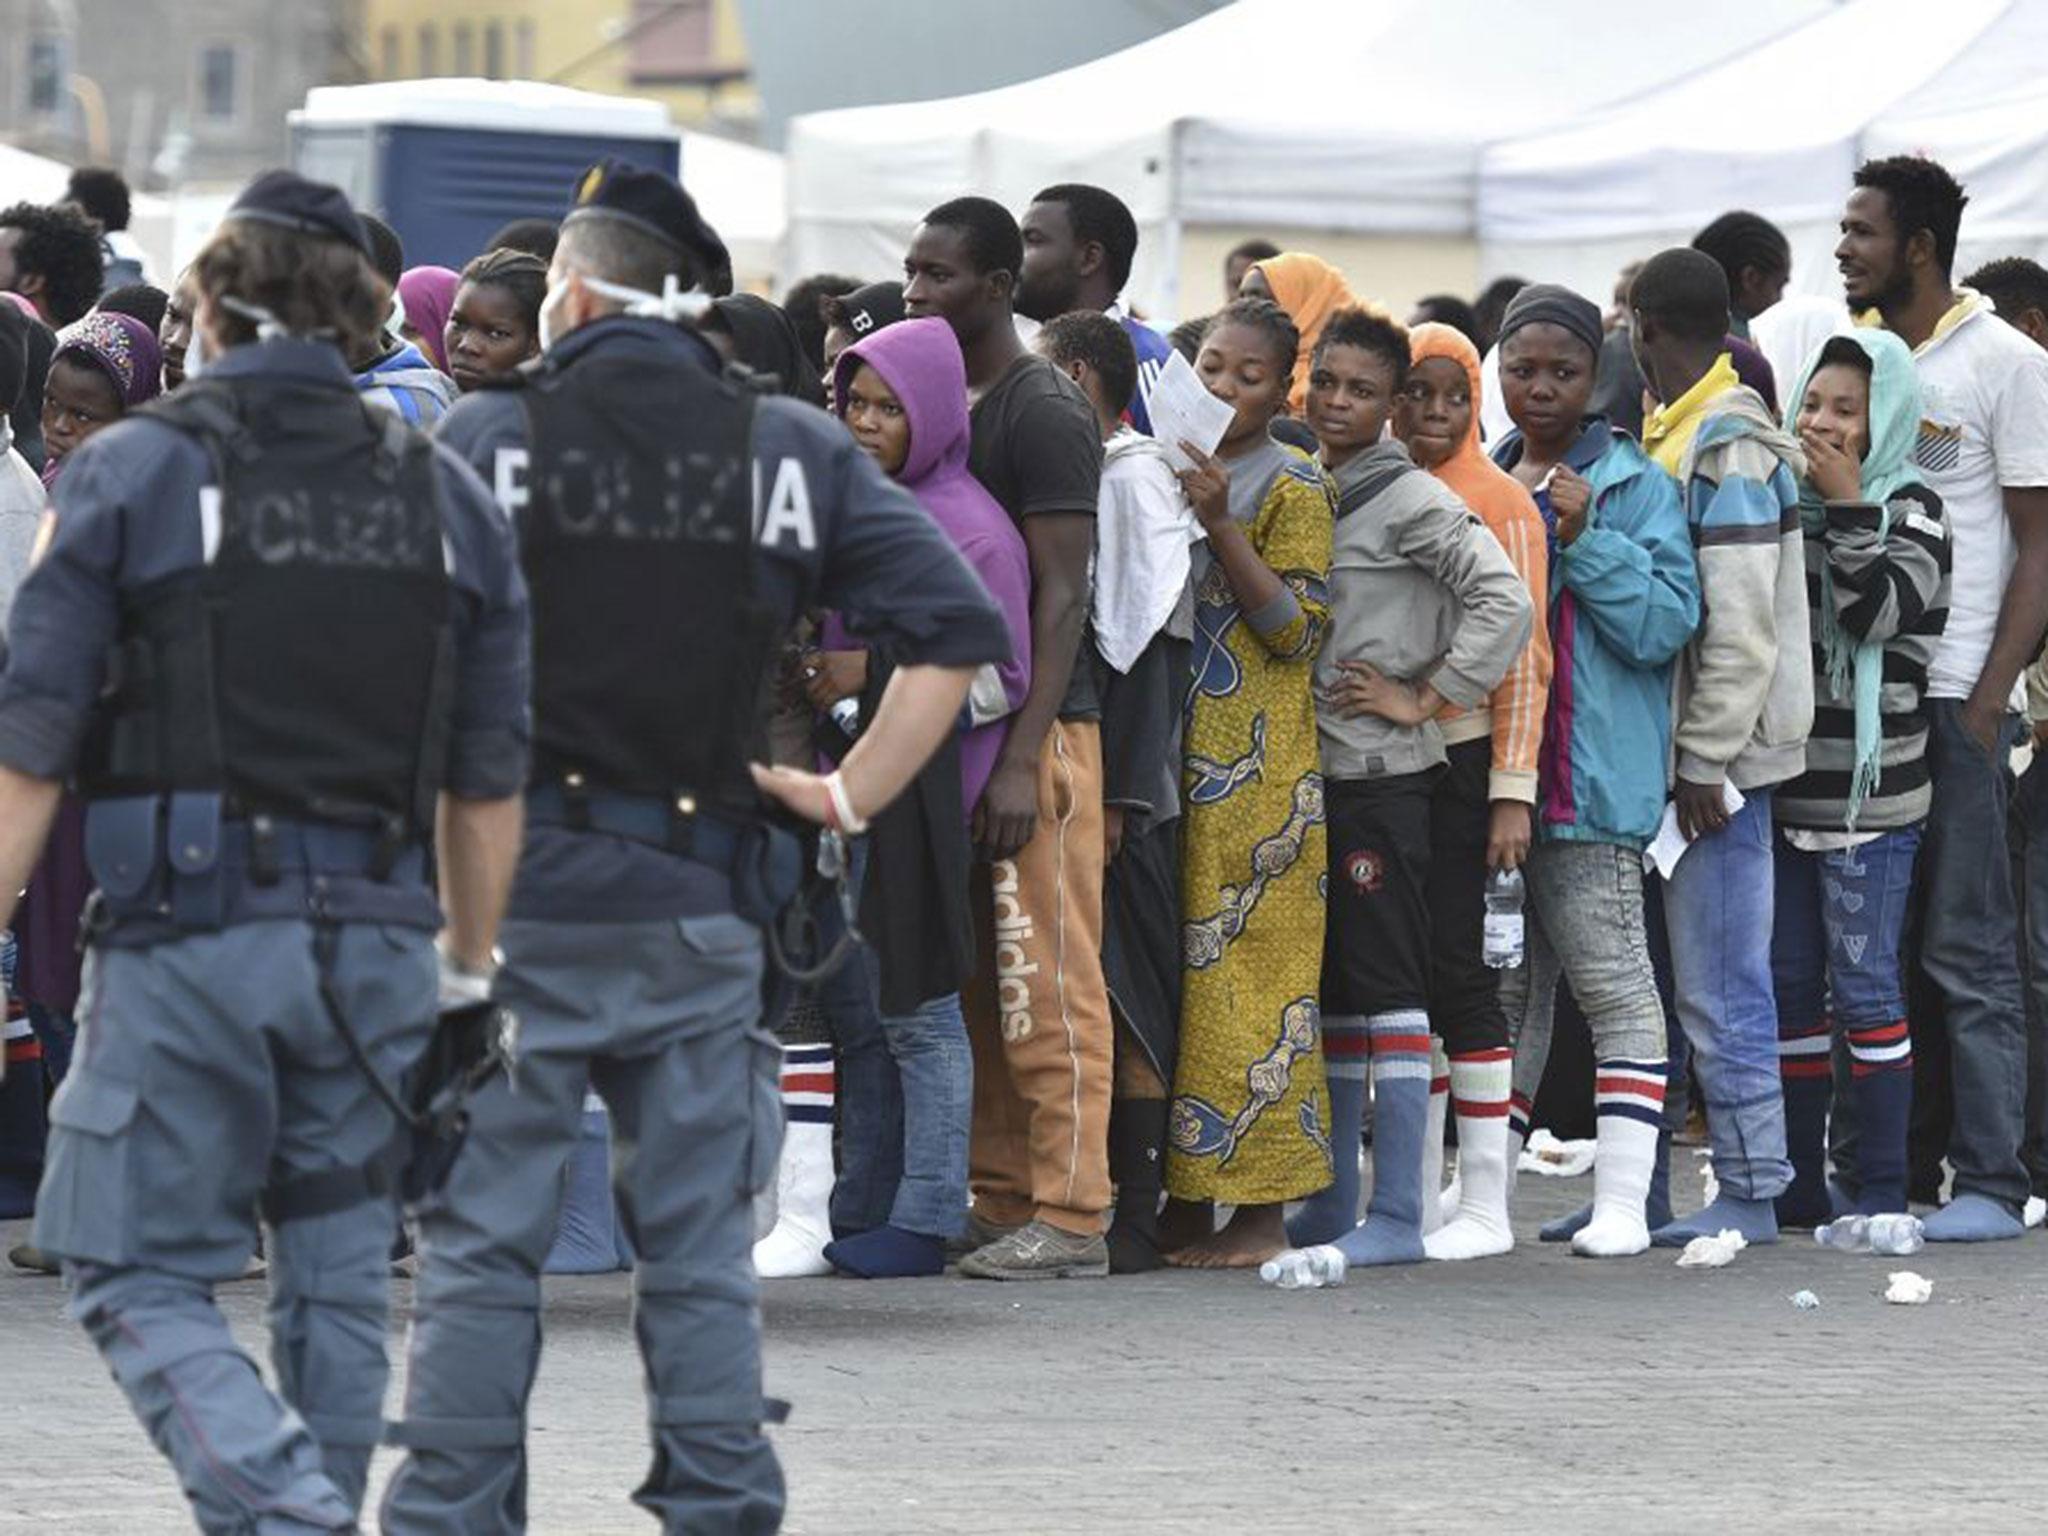 Some migrants claimed they were abused by police after they refused to be fingerprinted